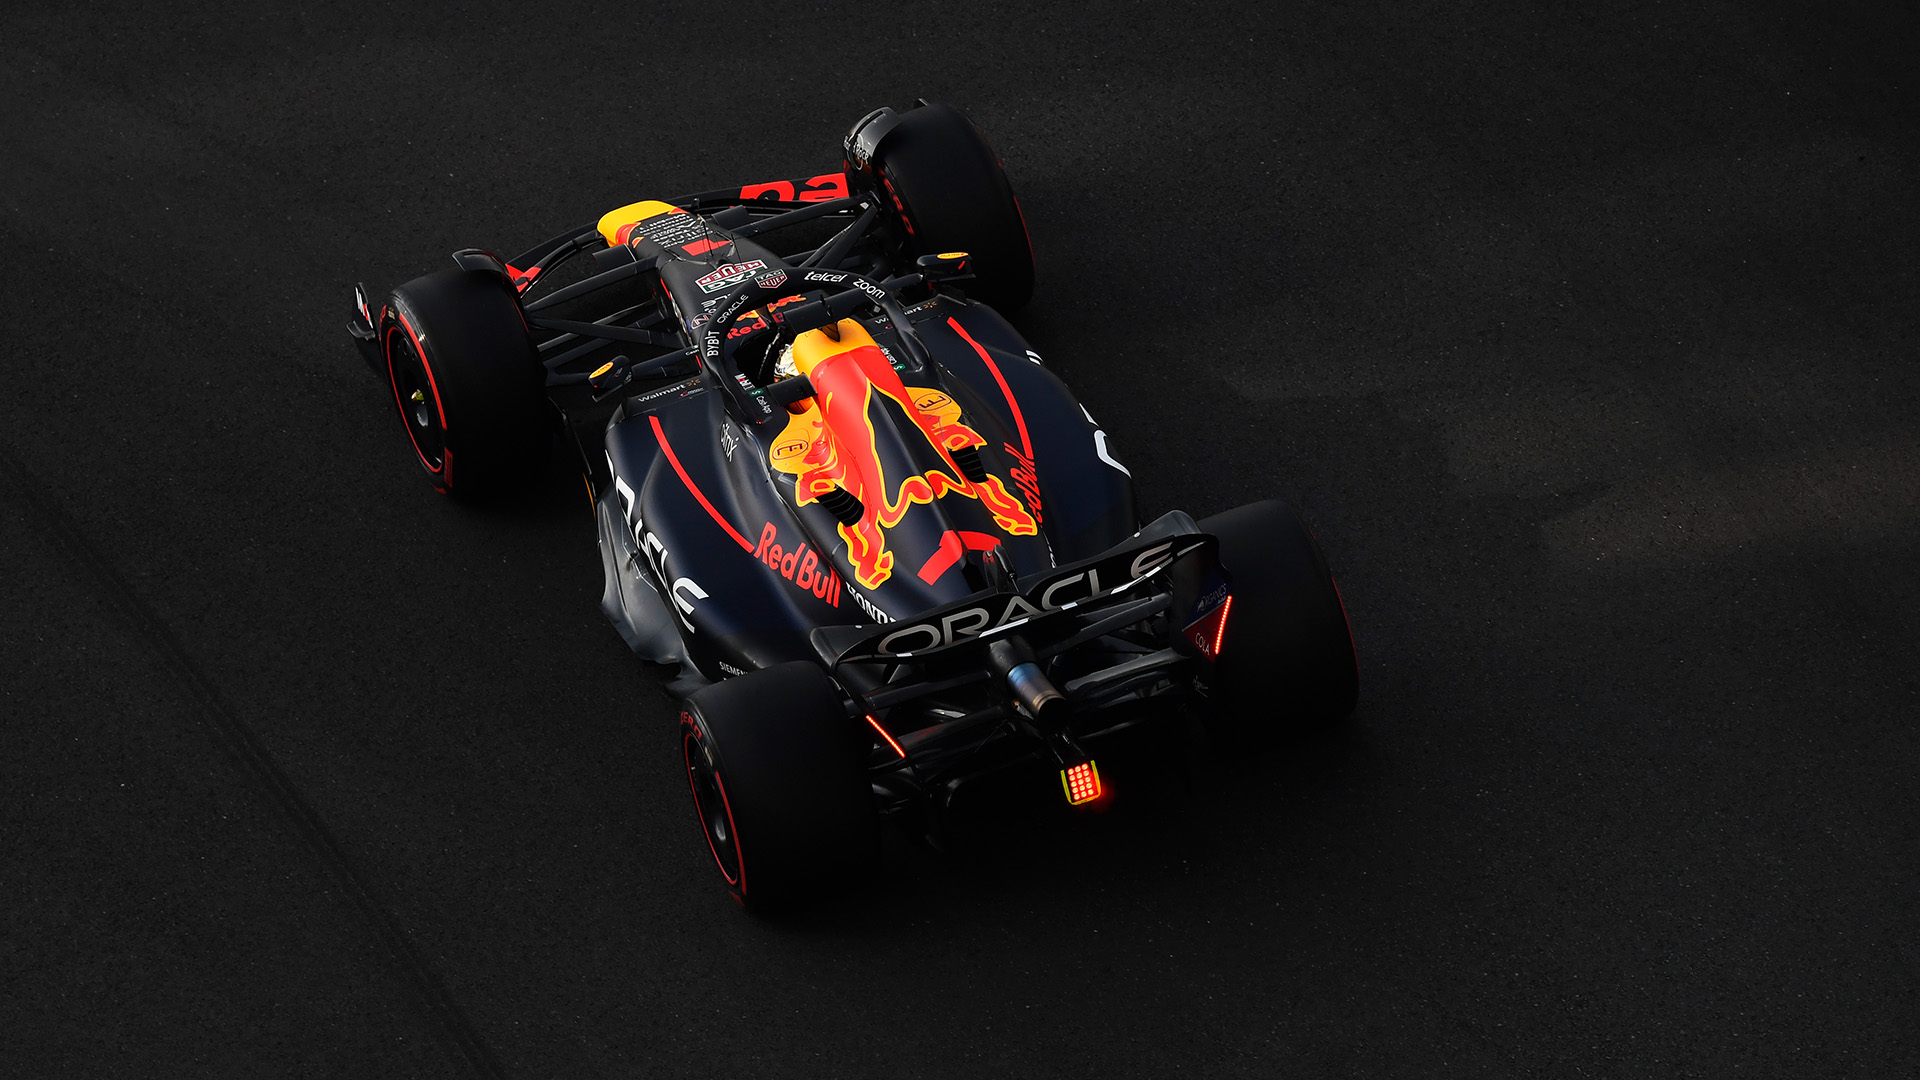 Verstappen says Red Bull have 'a lot of great ideas' for their 2023 car as he targets third successive title. Formula 1®